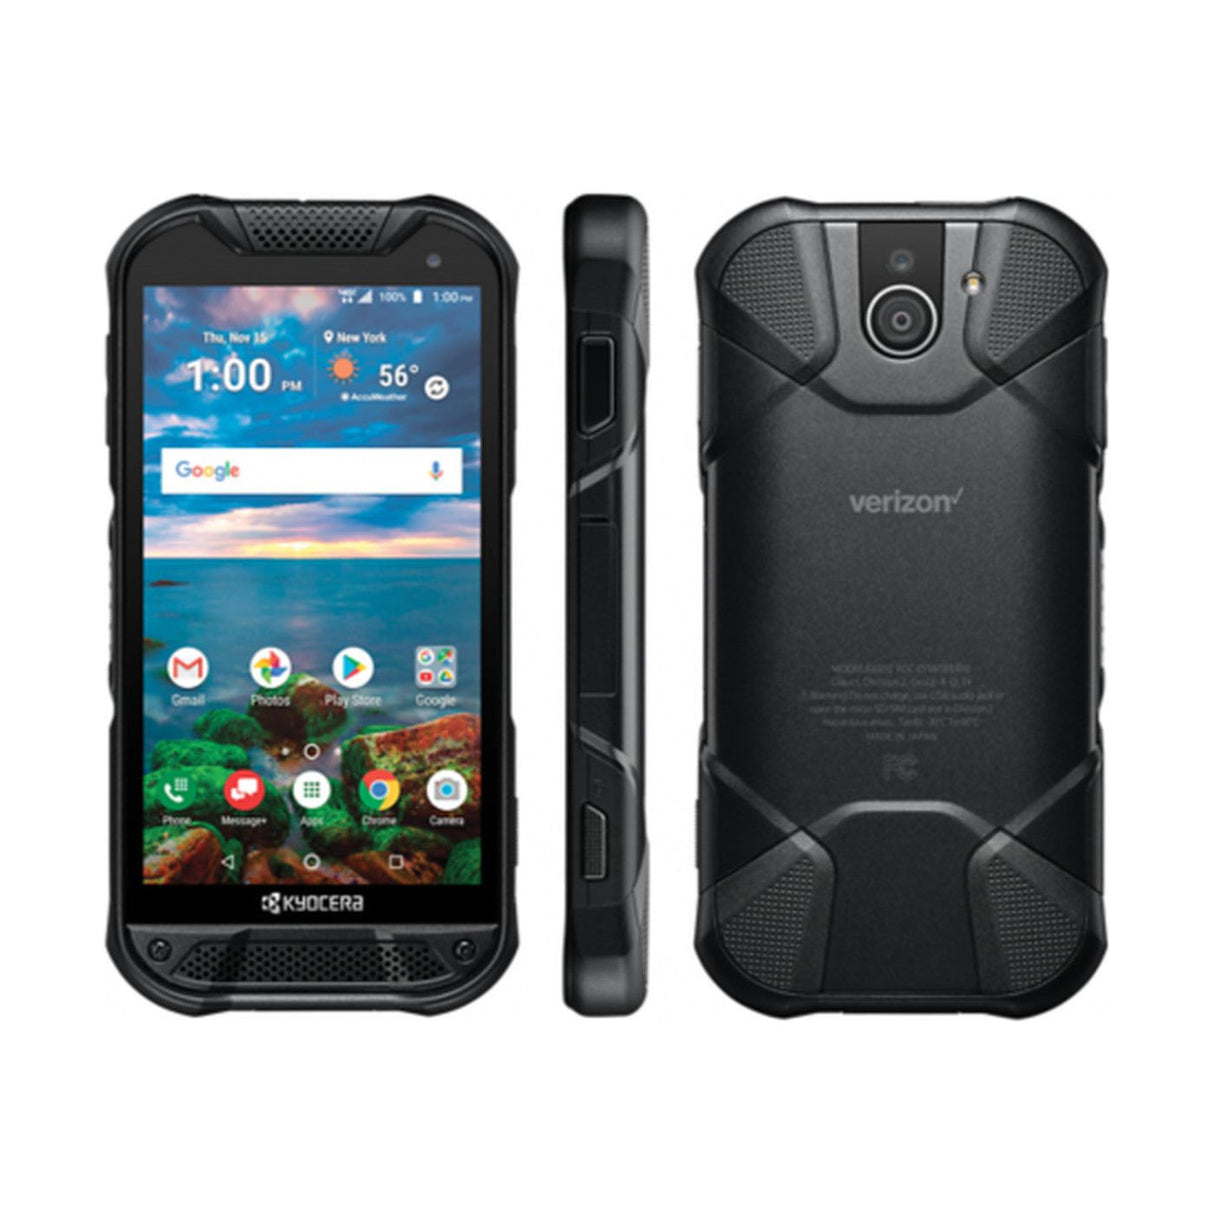 Kyocera DuraForce Pro 2 with Sapphire Shield 64 GB in black